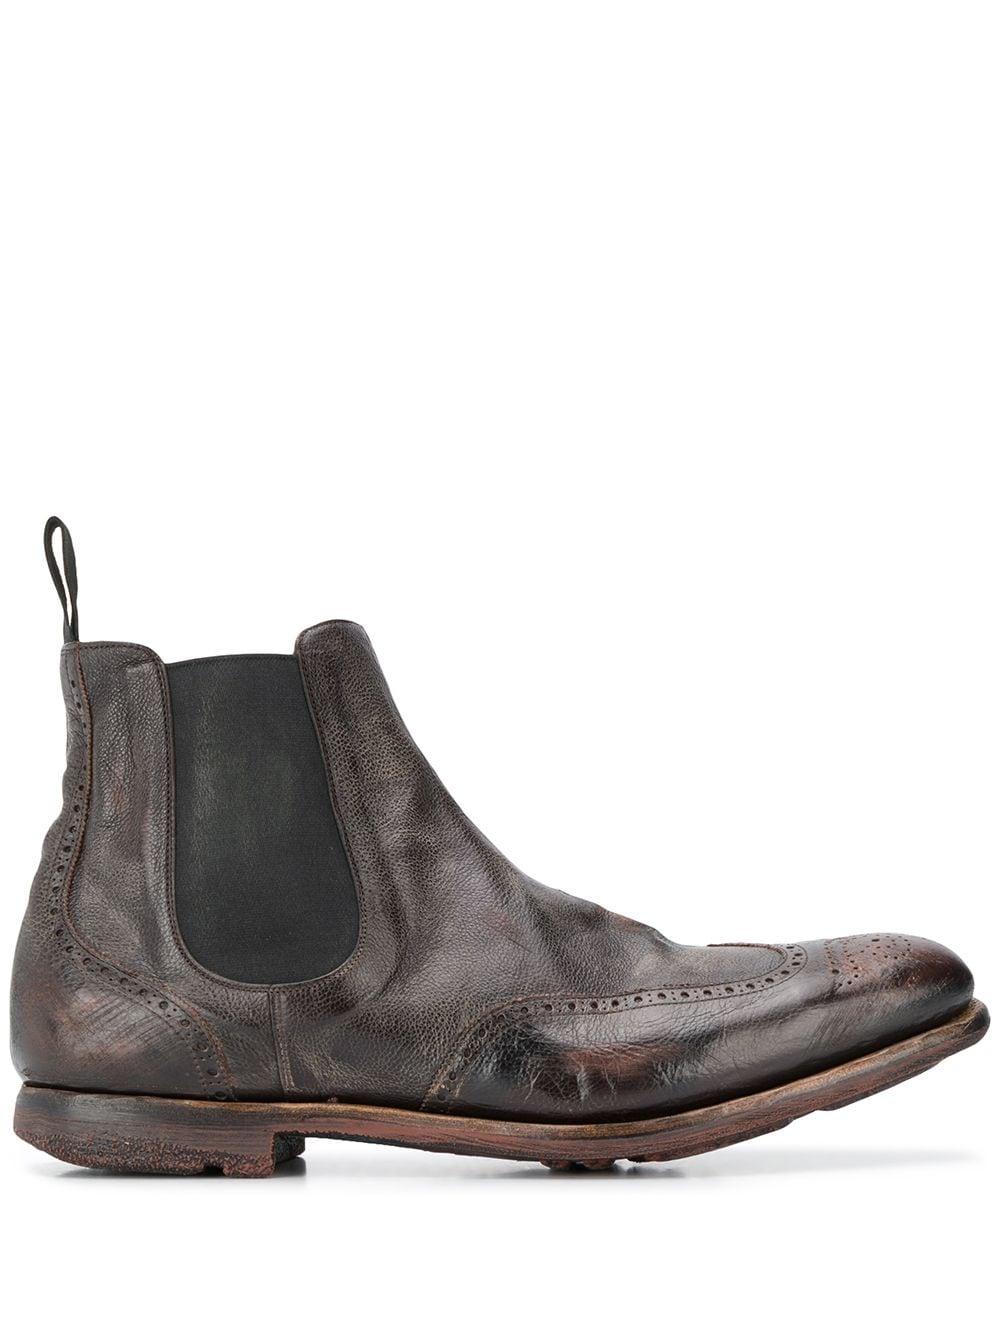 Church's Distressed Effect Chelsea Boots in Brown for Men | Lyst